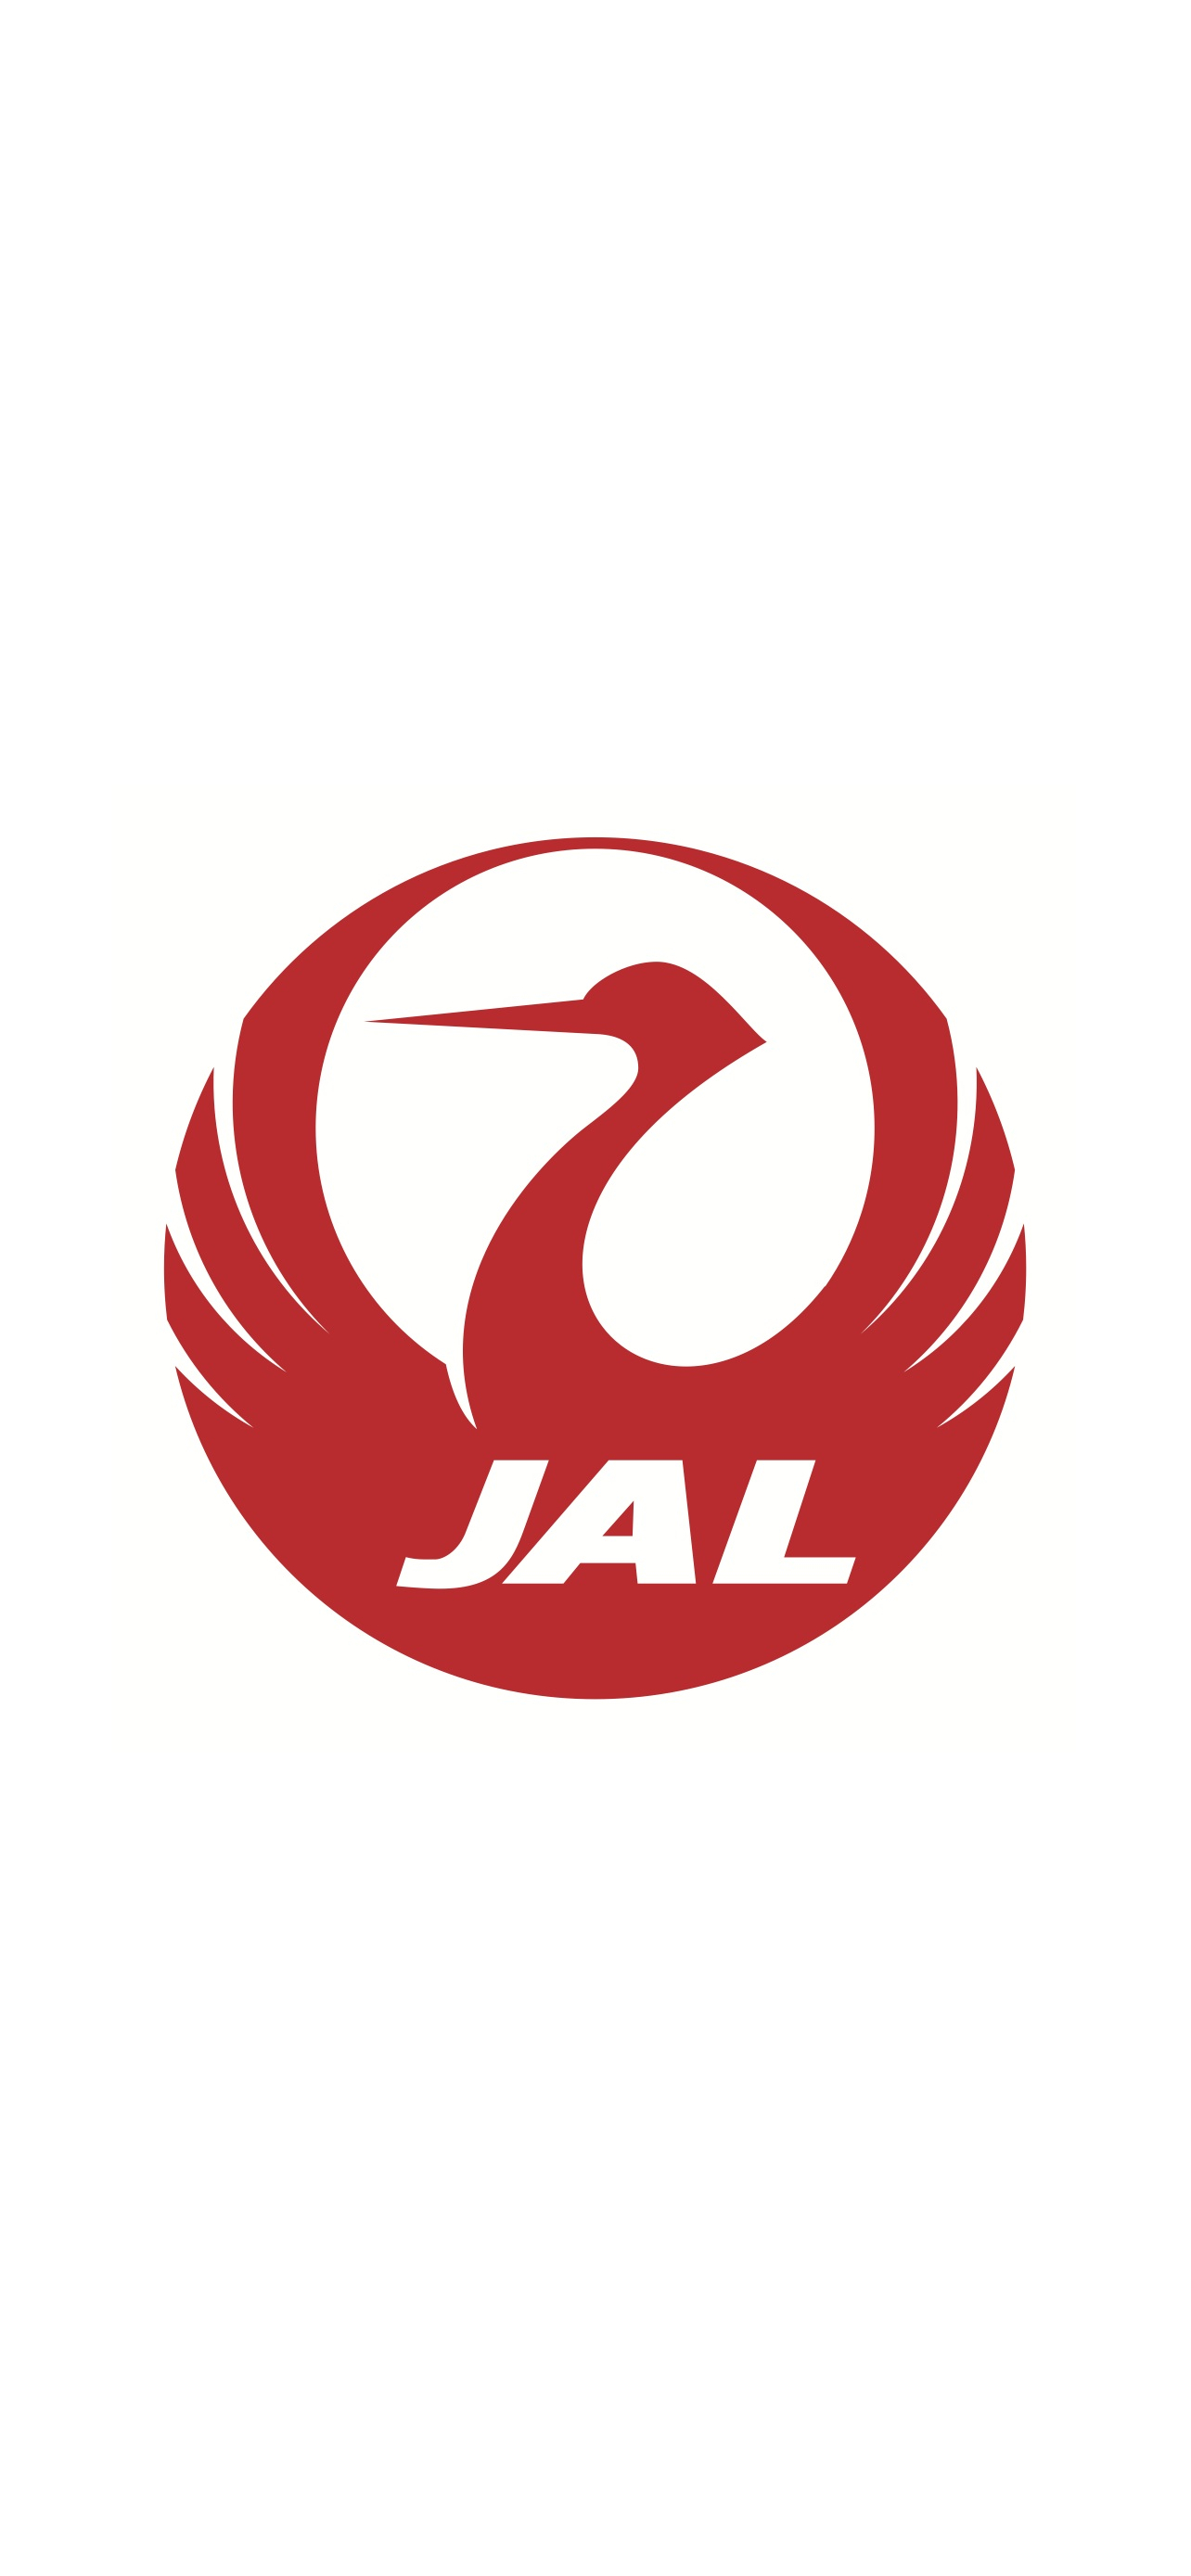 Jal Japan Airlines 日本航空 Iphone 13 Pro Max 壁紙 待ち受け スマラン